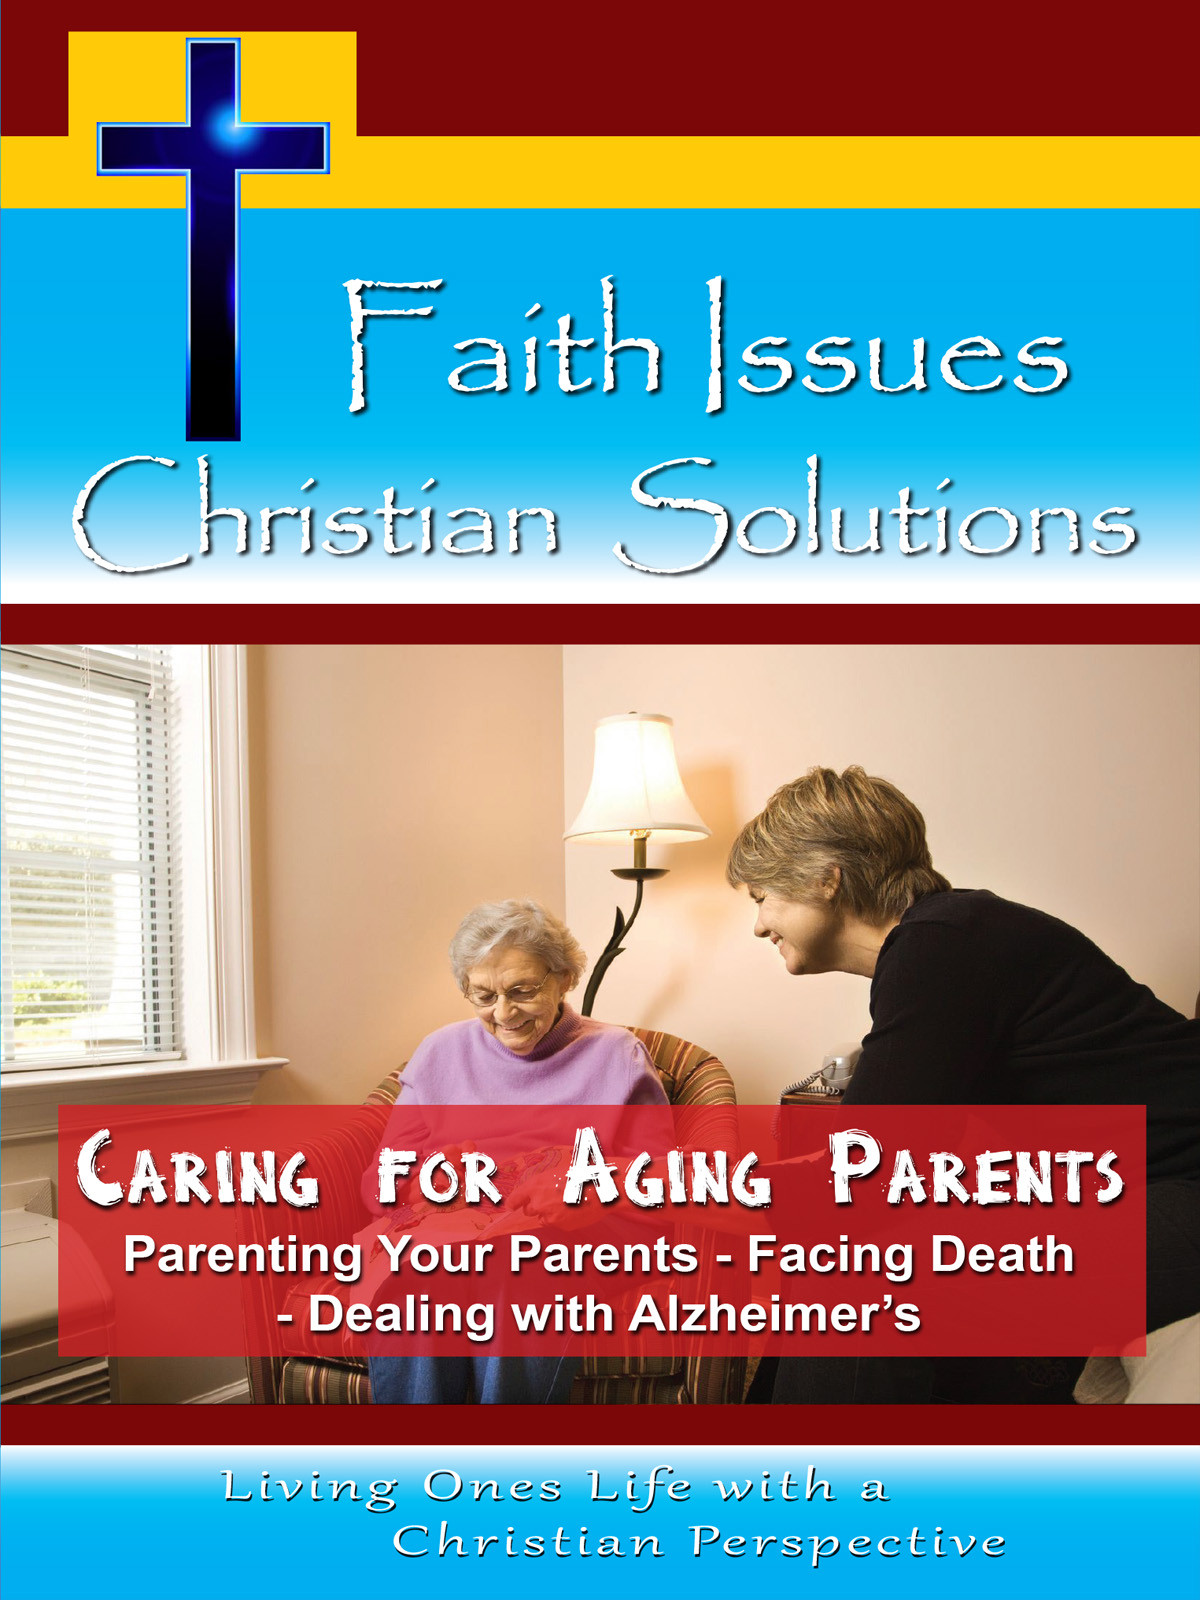 CH10043 - Caring for Aging Parents The Growing Challenge of Caring for a Loved One Parenting your Parents Dealing with Alzheimer's Facing Death